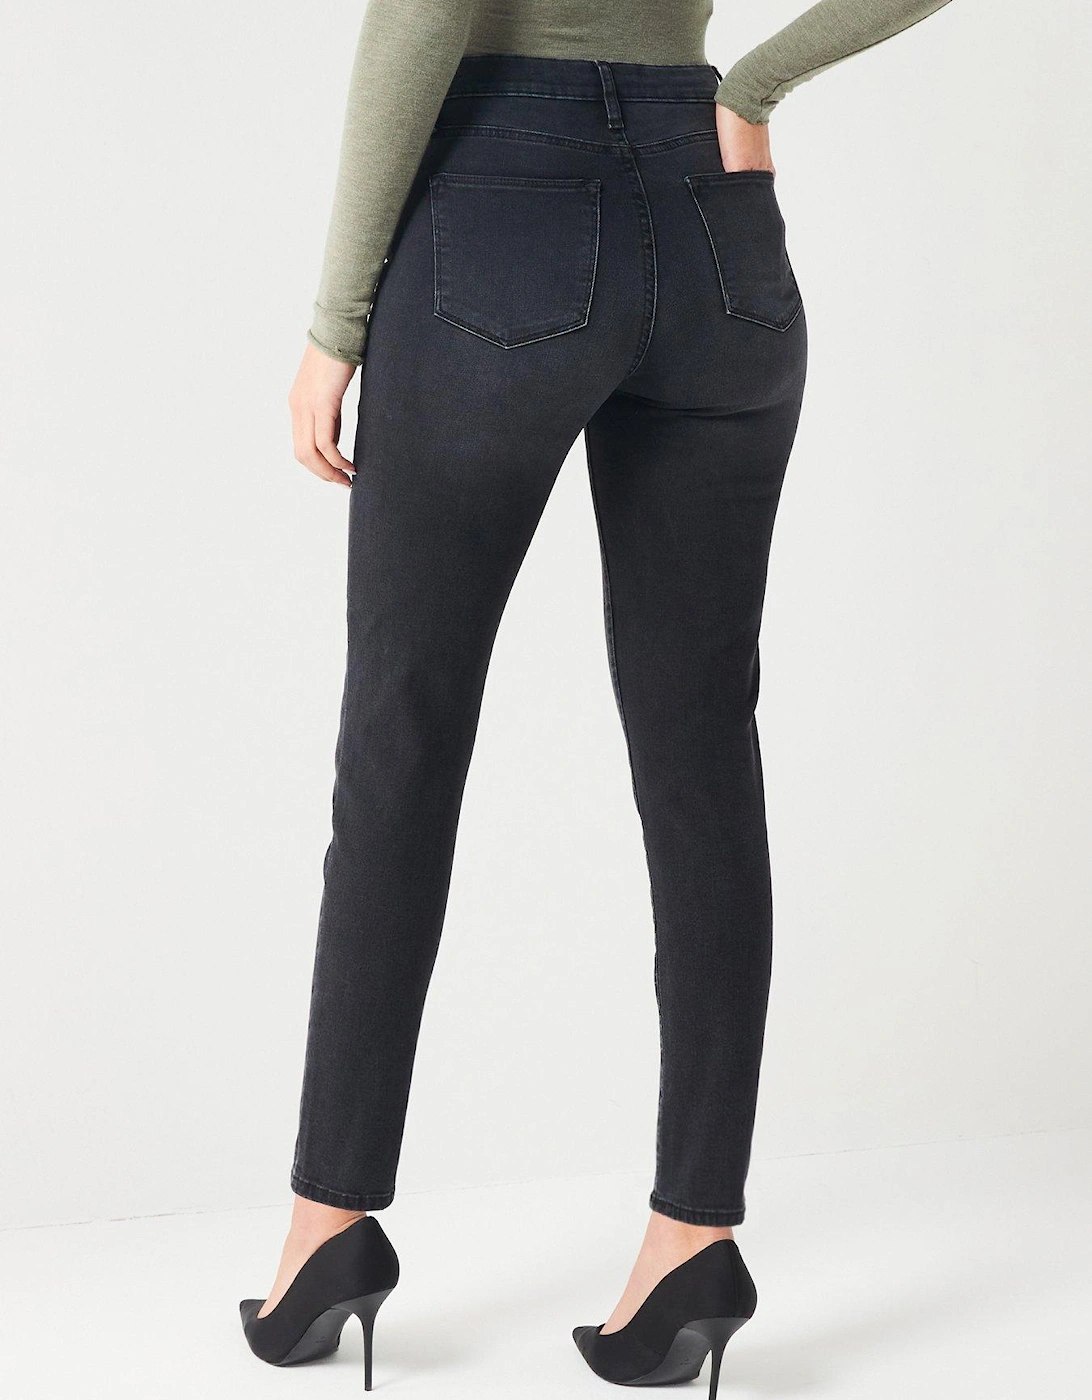 Relaxed Skinny Jeans - Washed Black